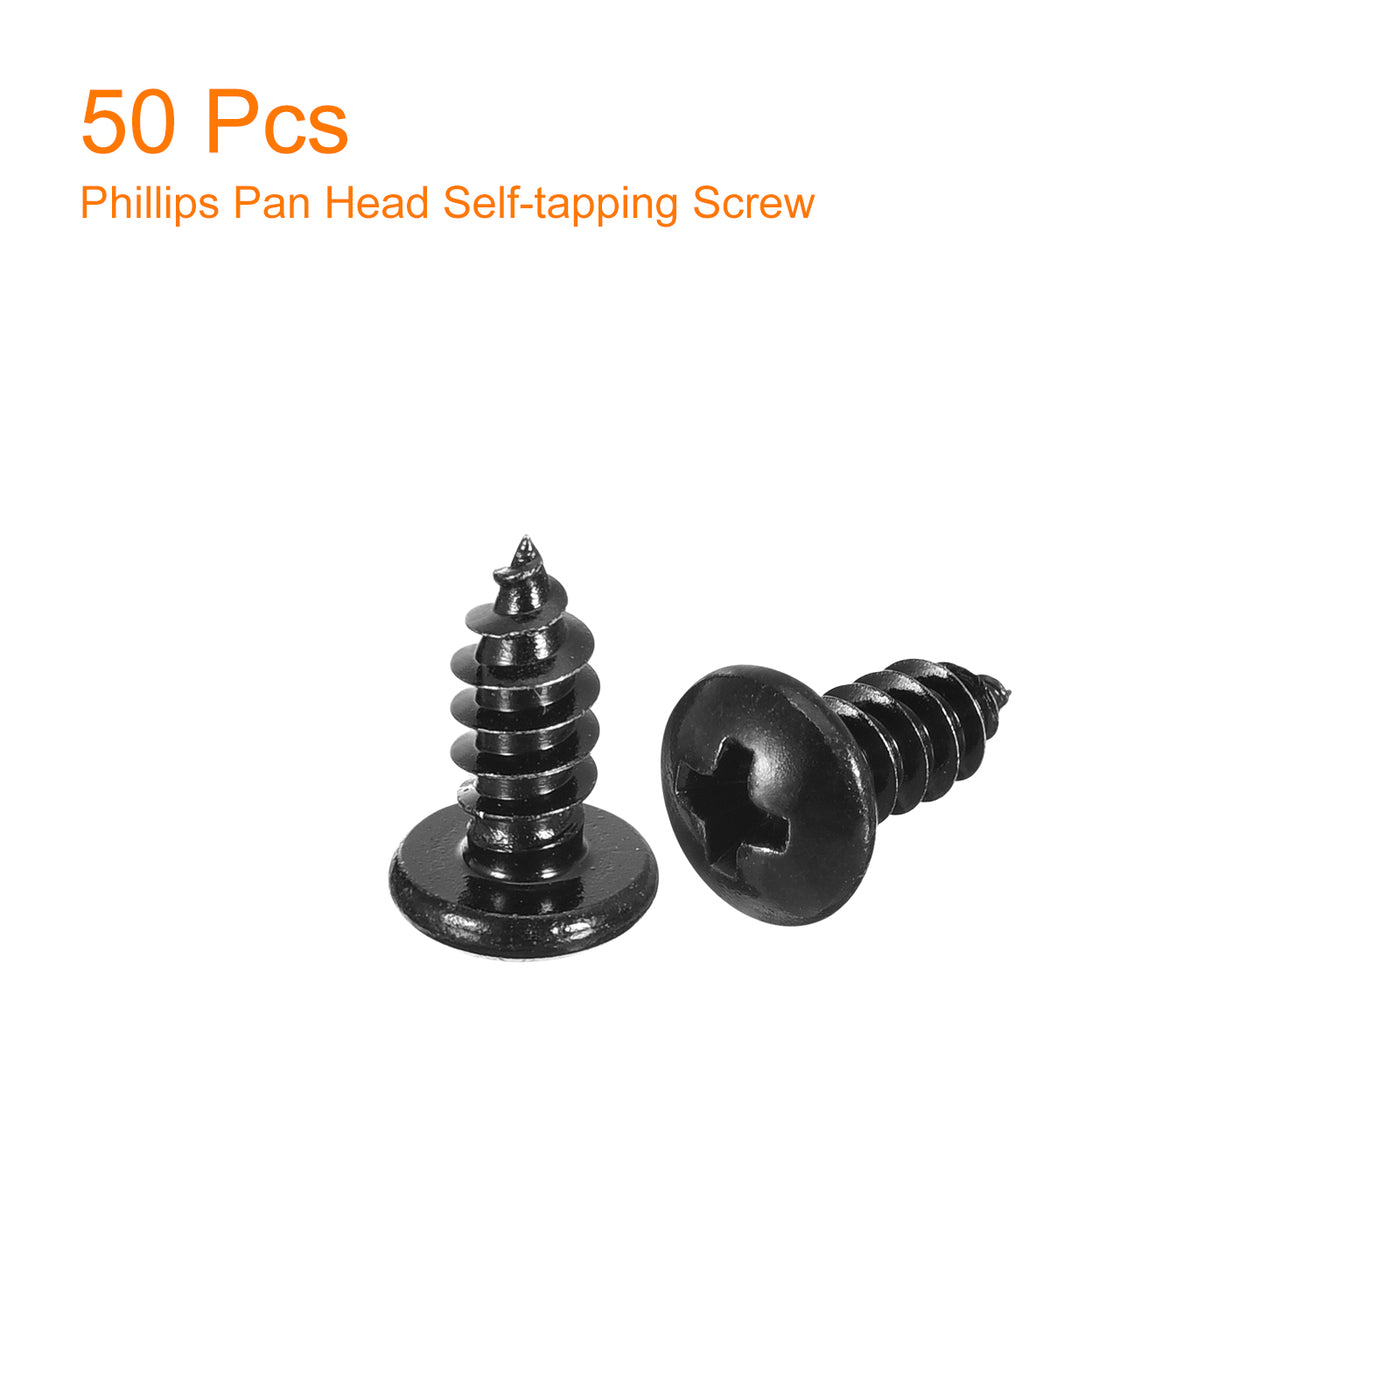 uxcell Uxcell 5mm x 12mm Phillips Pan Head Self-tapping Screw, 50pcs - 304 Stainless Steel Round Head Wood Screw Full Thread (Black)